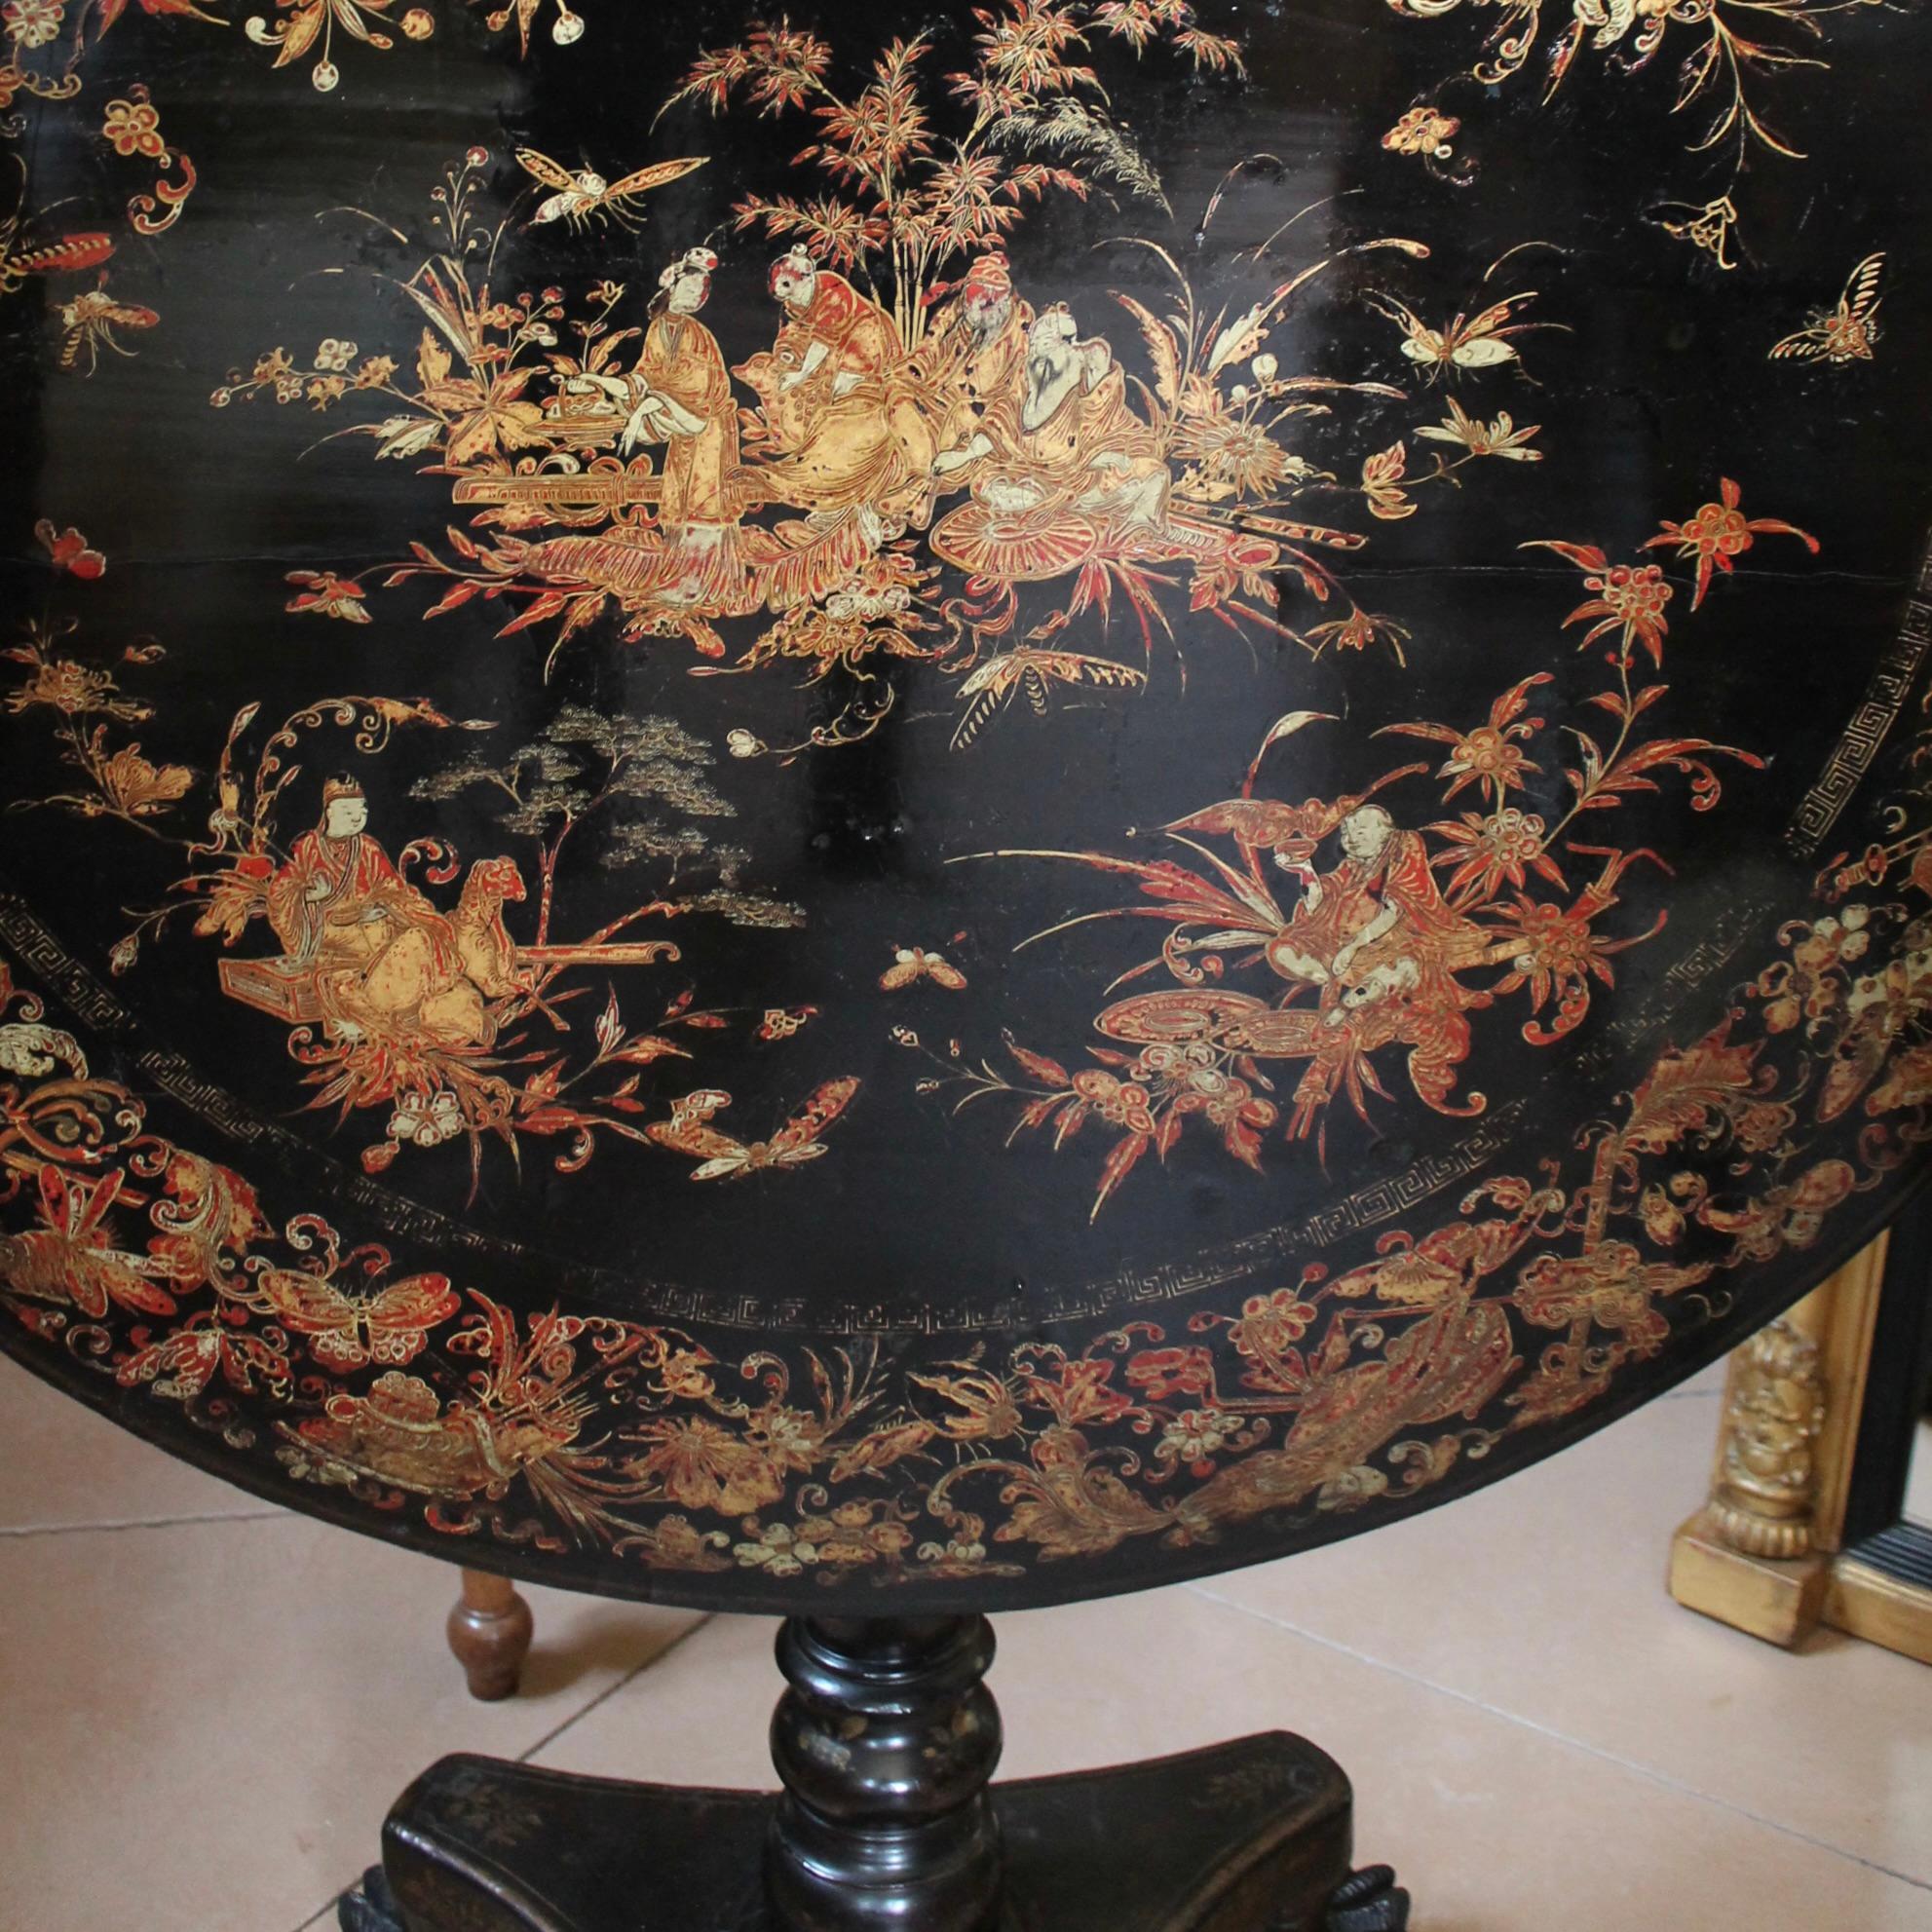 19th Century Fine Chinese Export Black Lacquer And Gilt Decorated Tilt Top Table For Sale